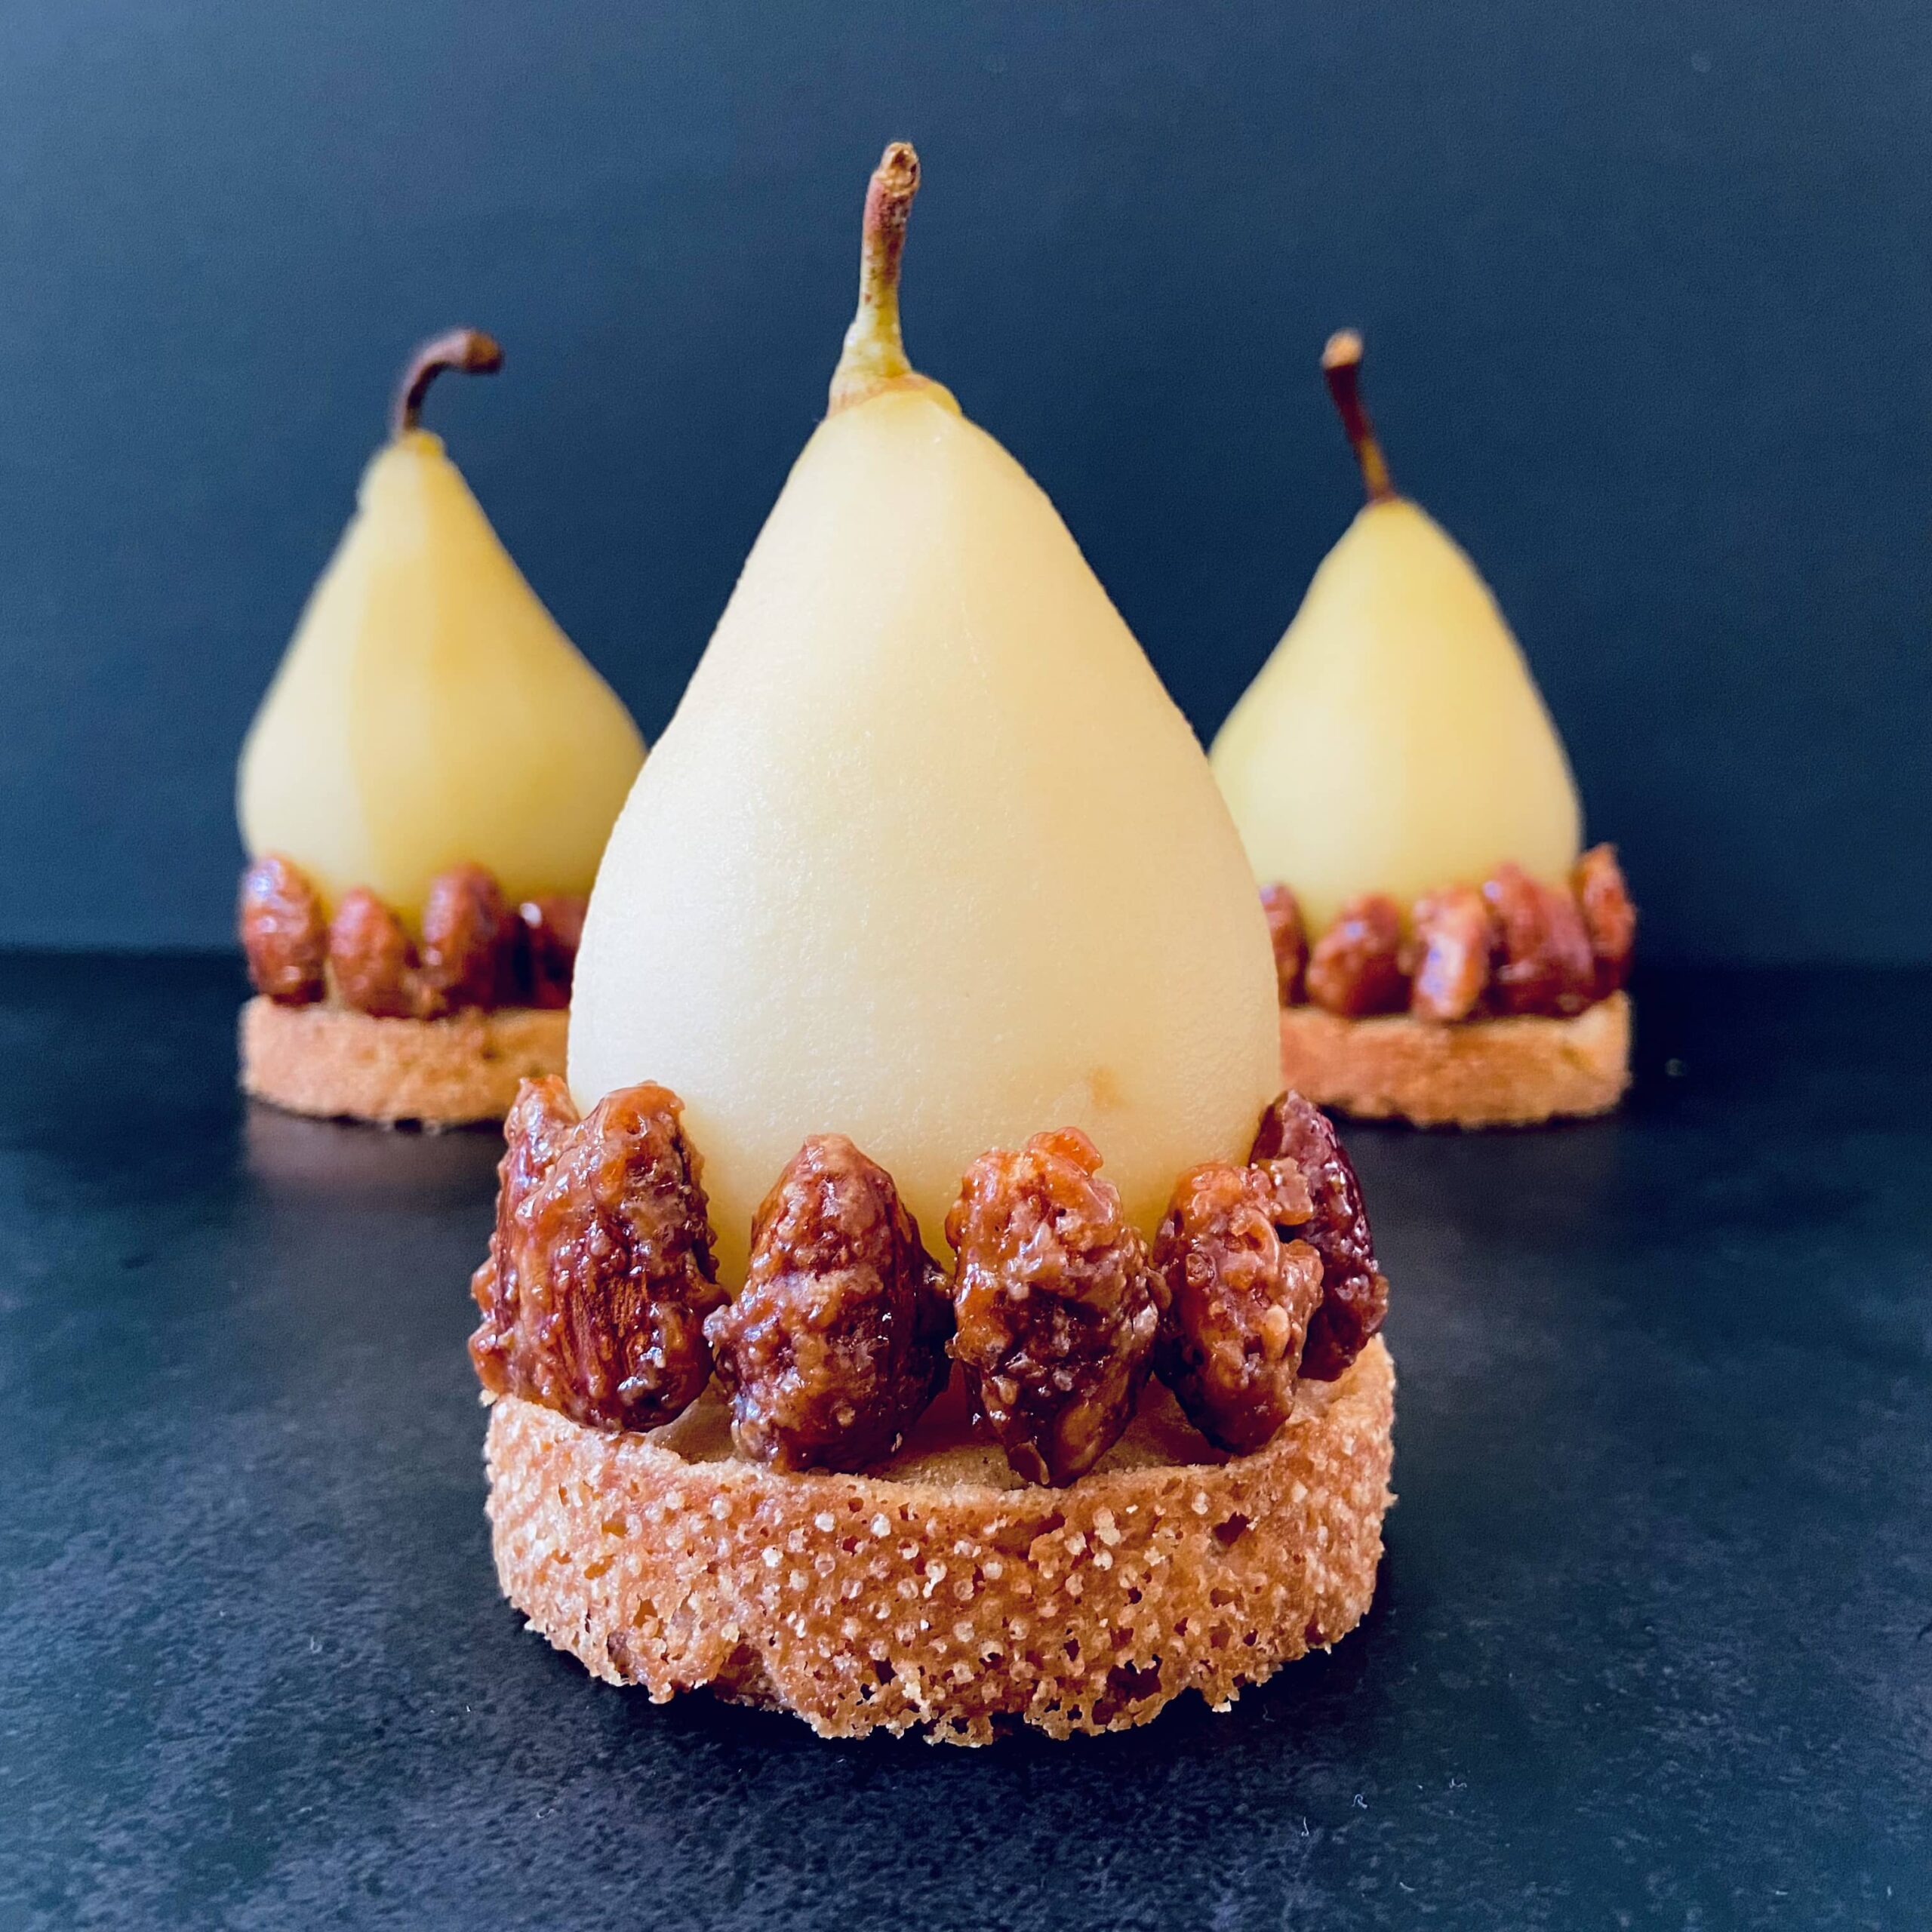 Pear tart with roasted almonds (with spelt & egg free)